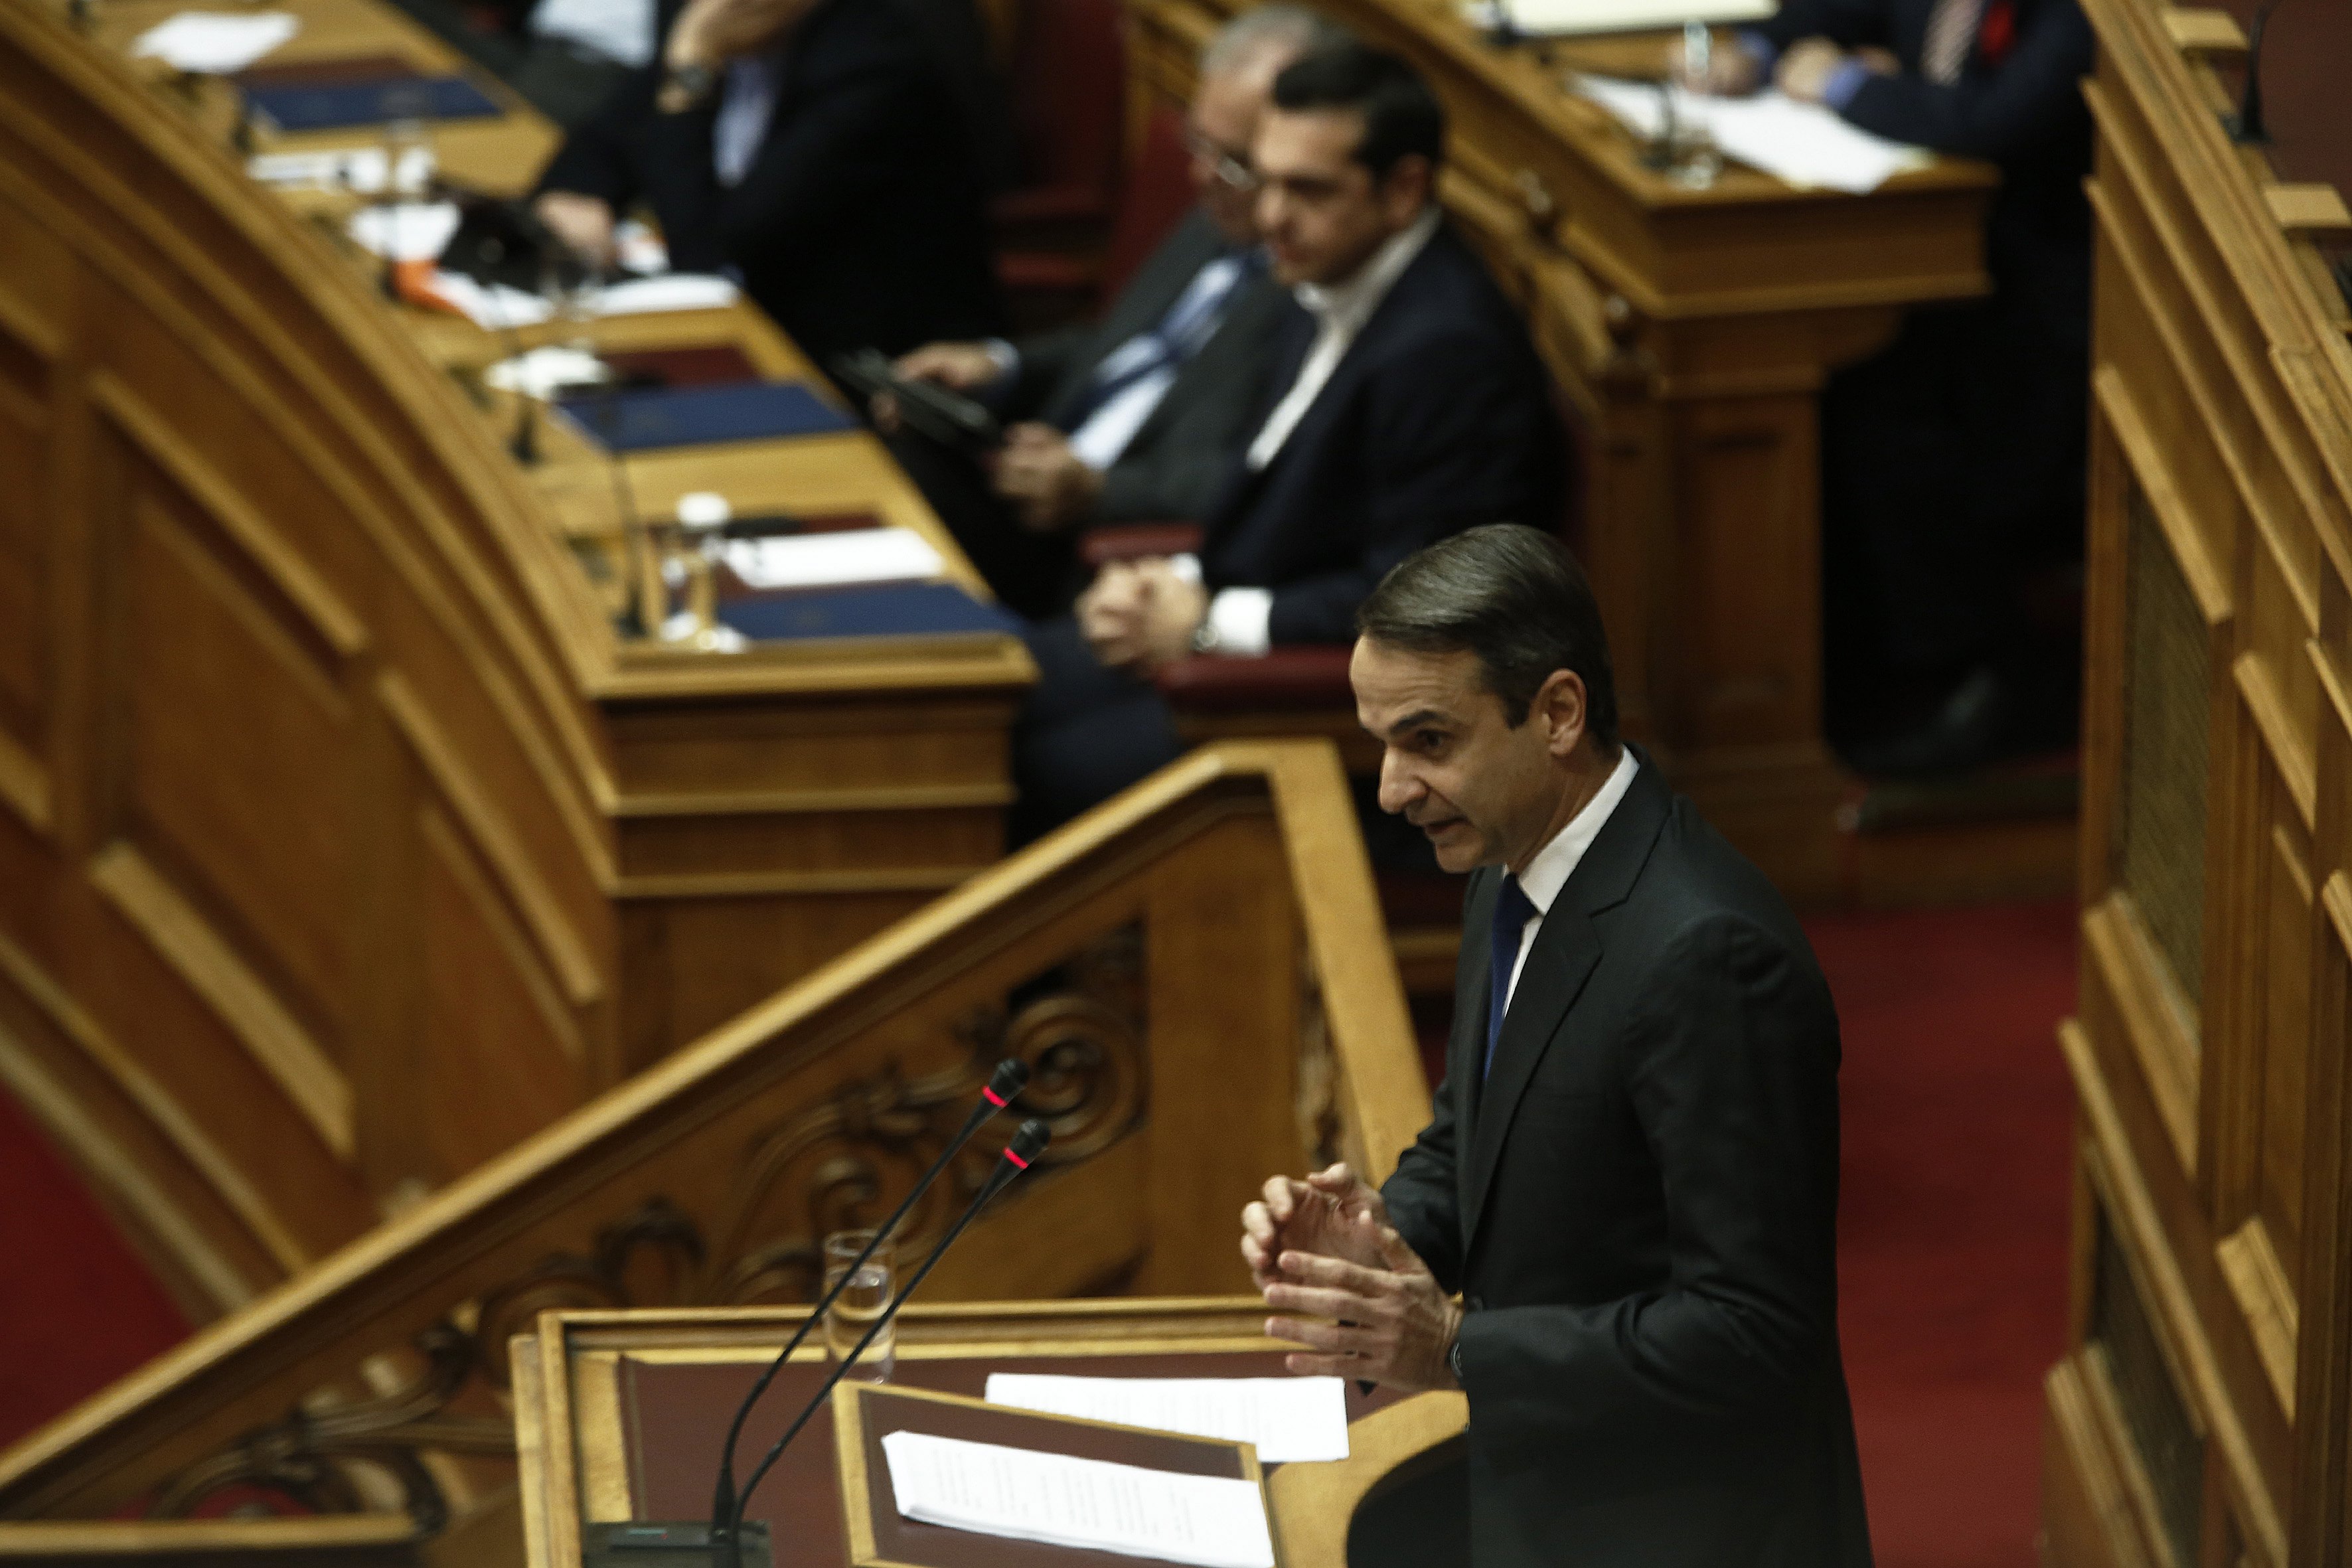 Budget debate: Tsipras, Mitsotakis present a tale of two Greeces